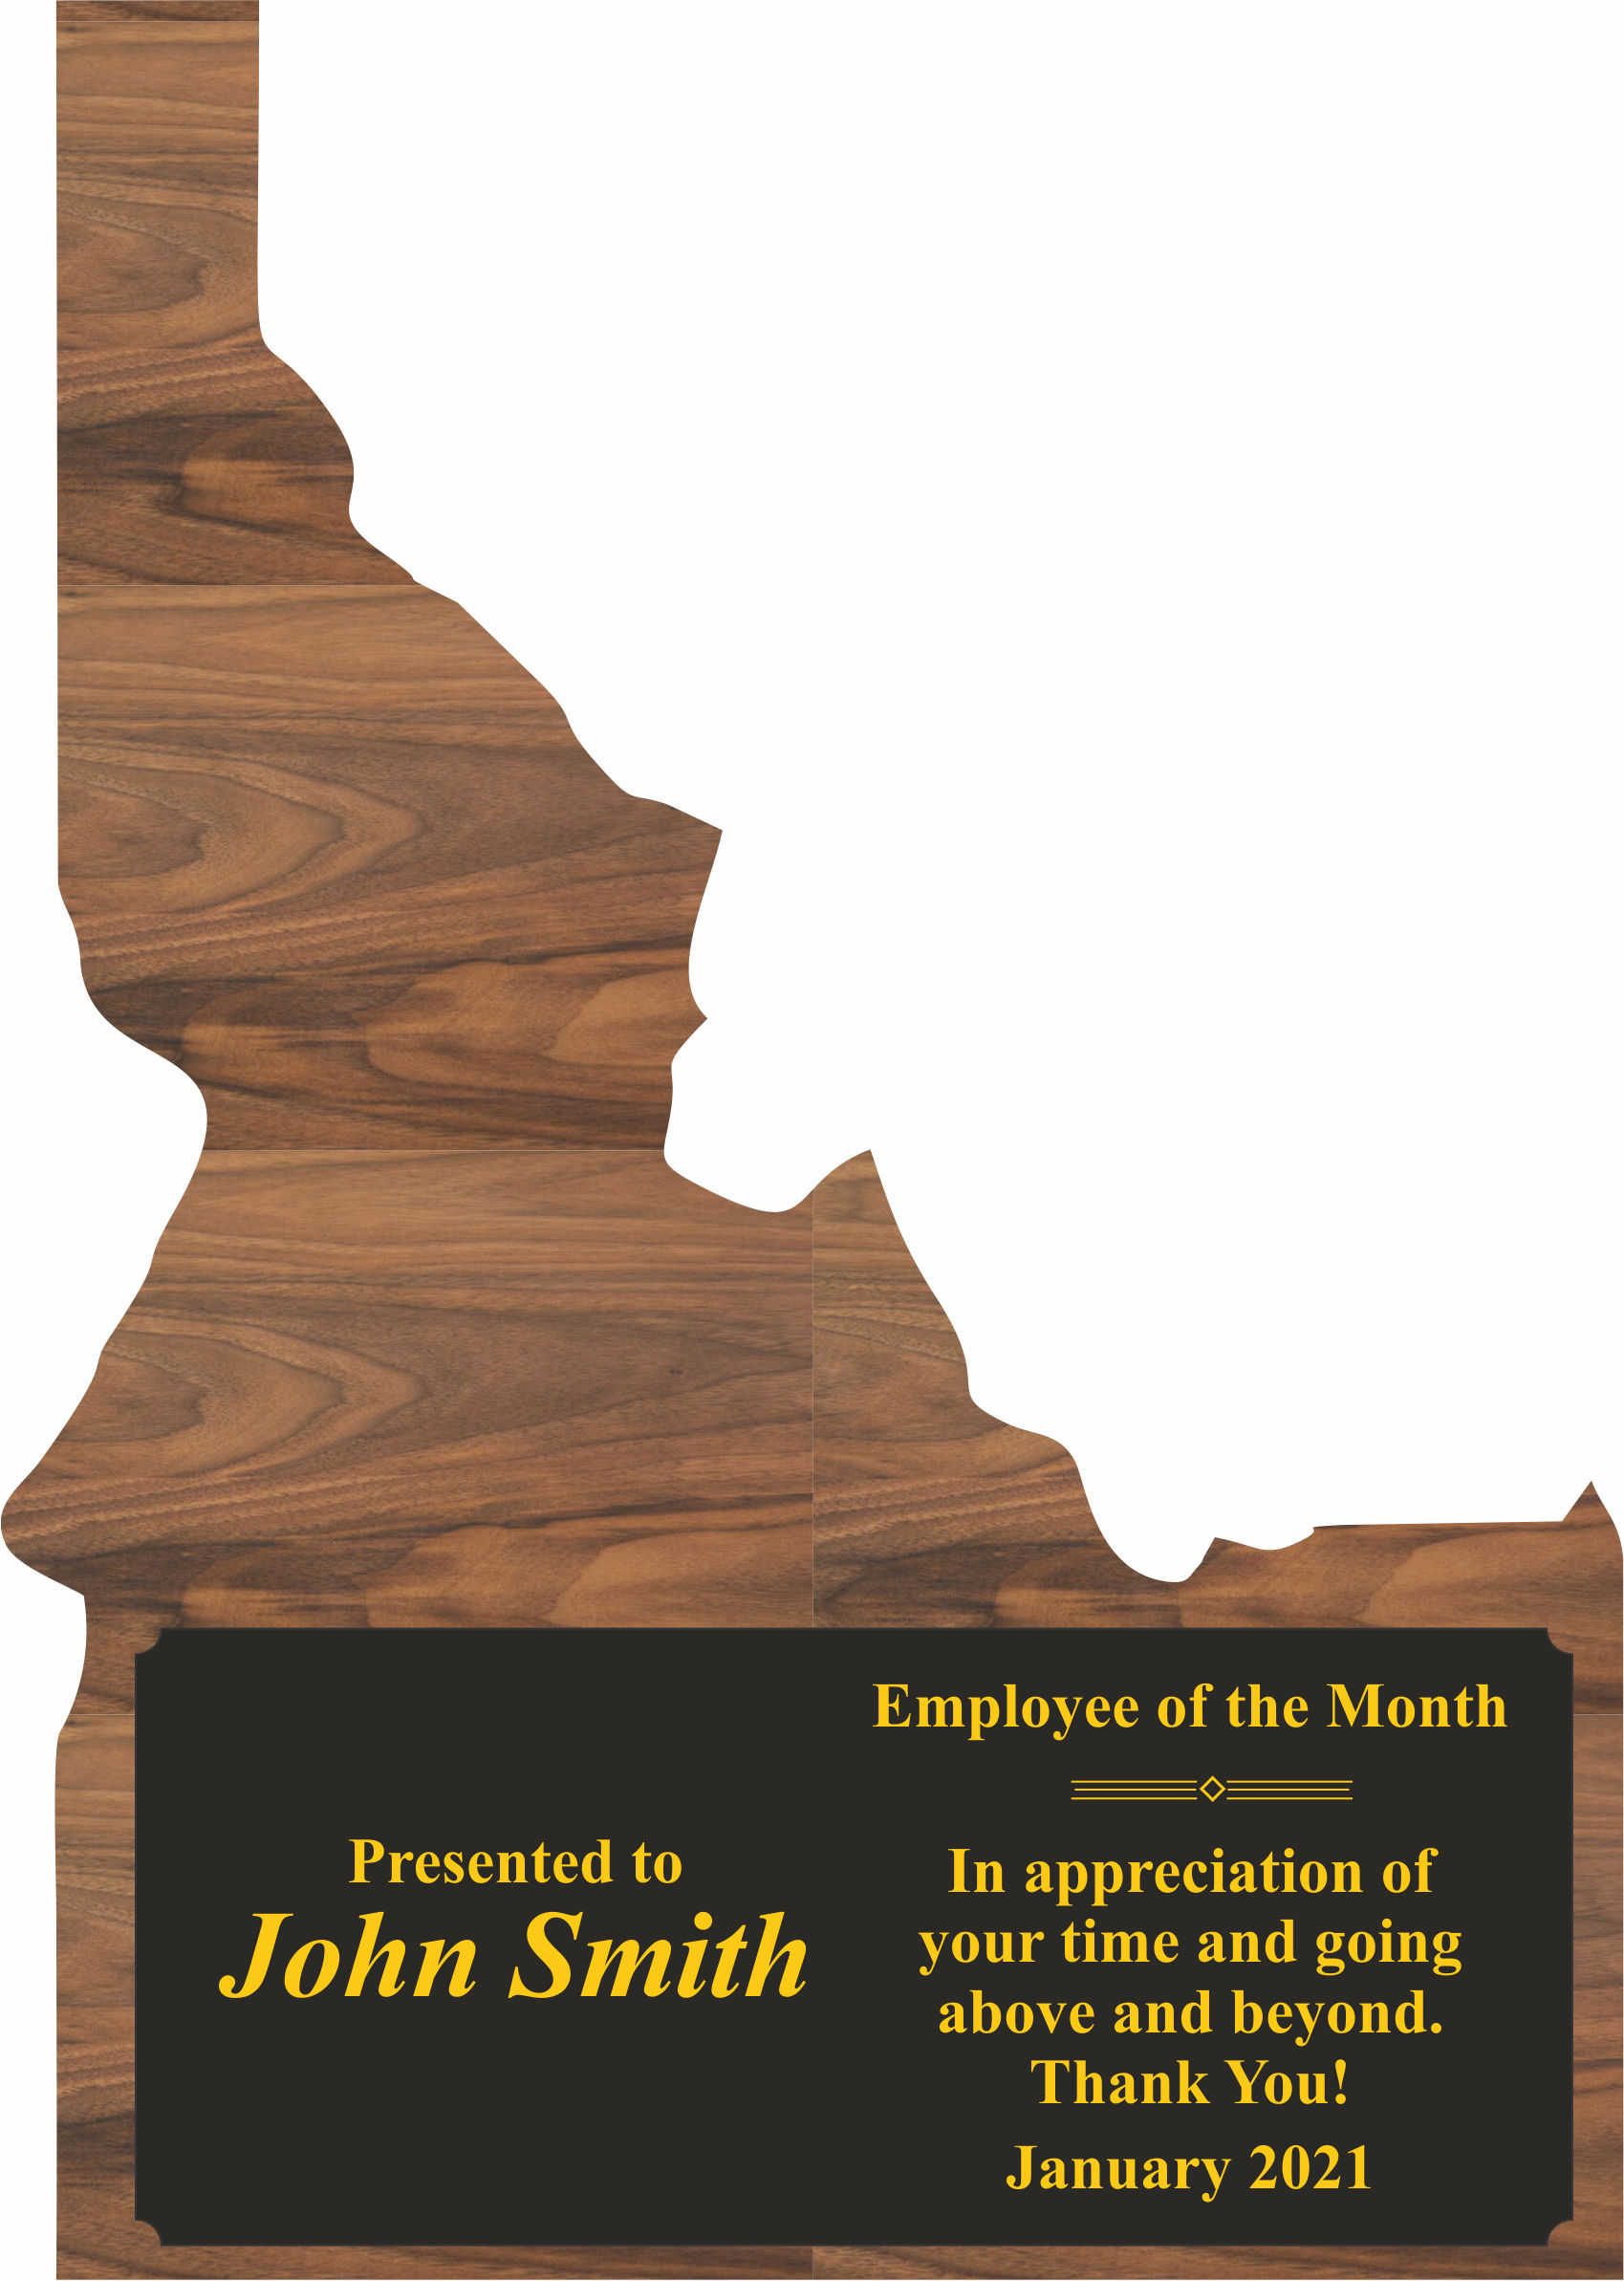 Idaho State Shaped Plaques, Custom Engraved With Your Logo!